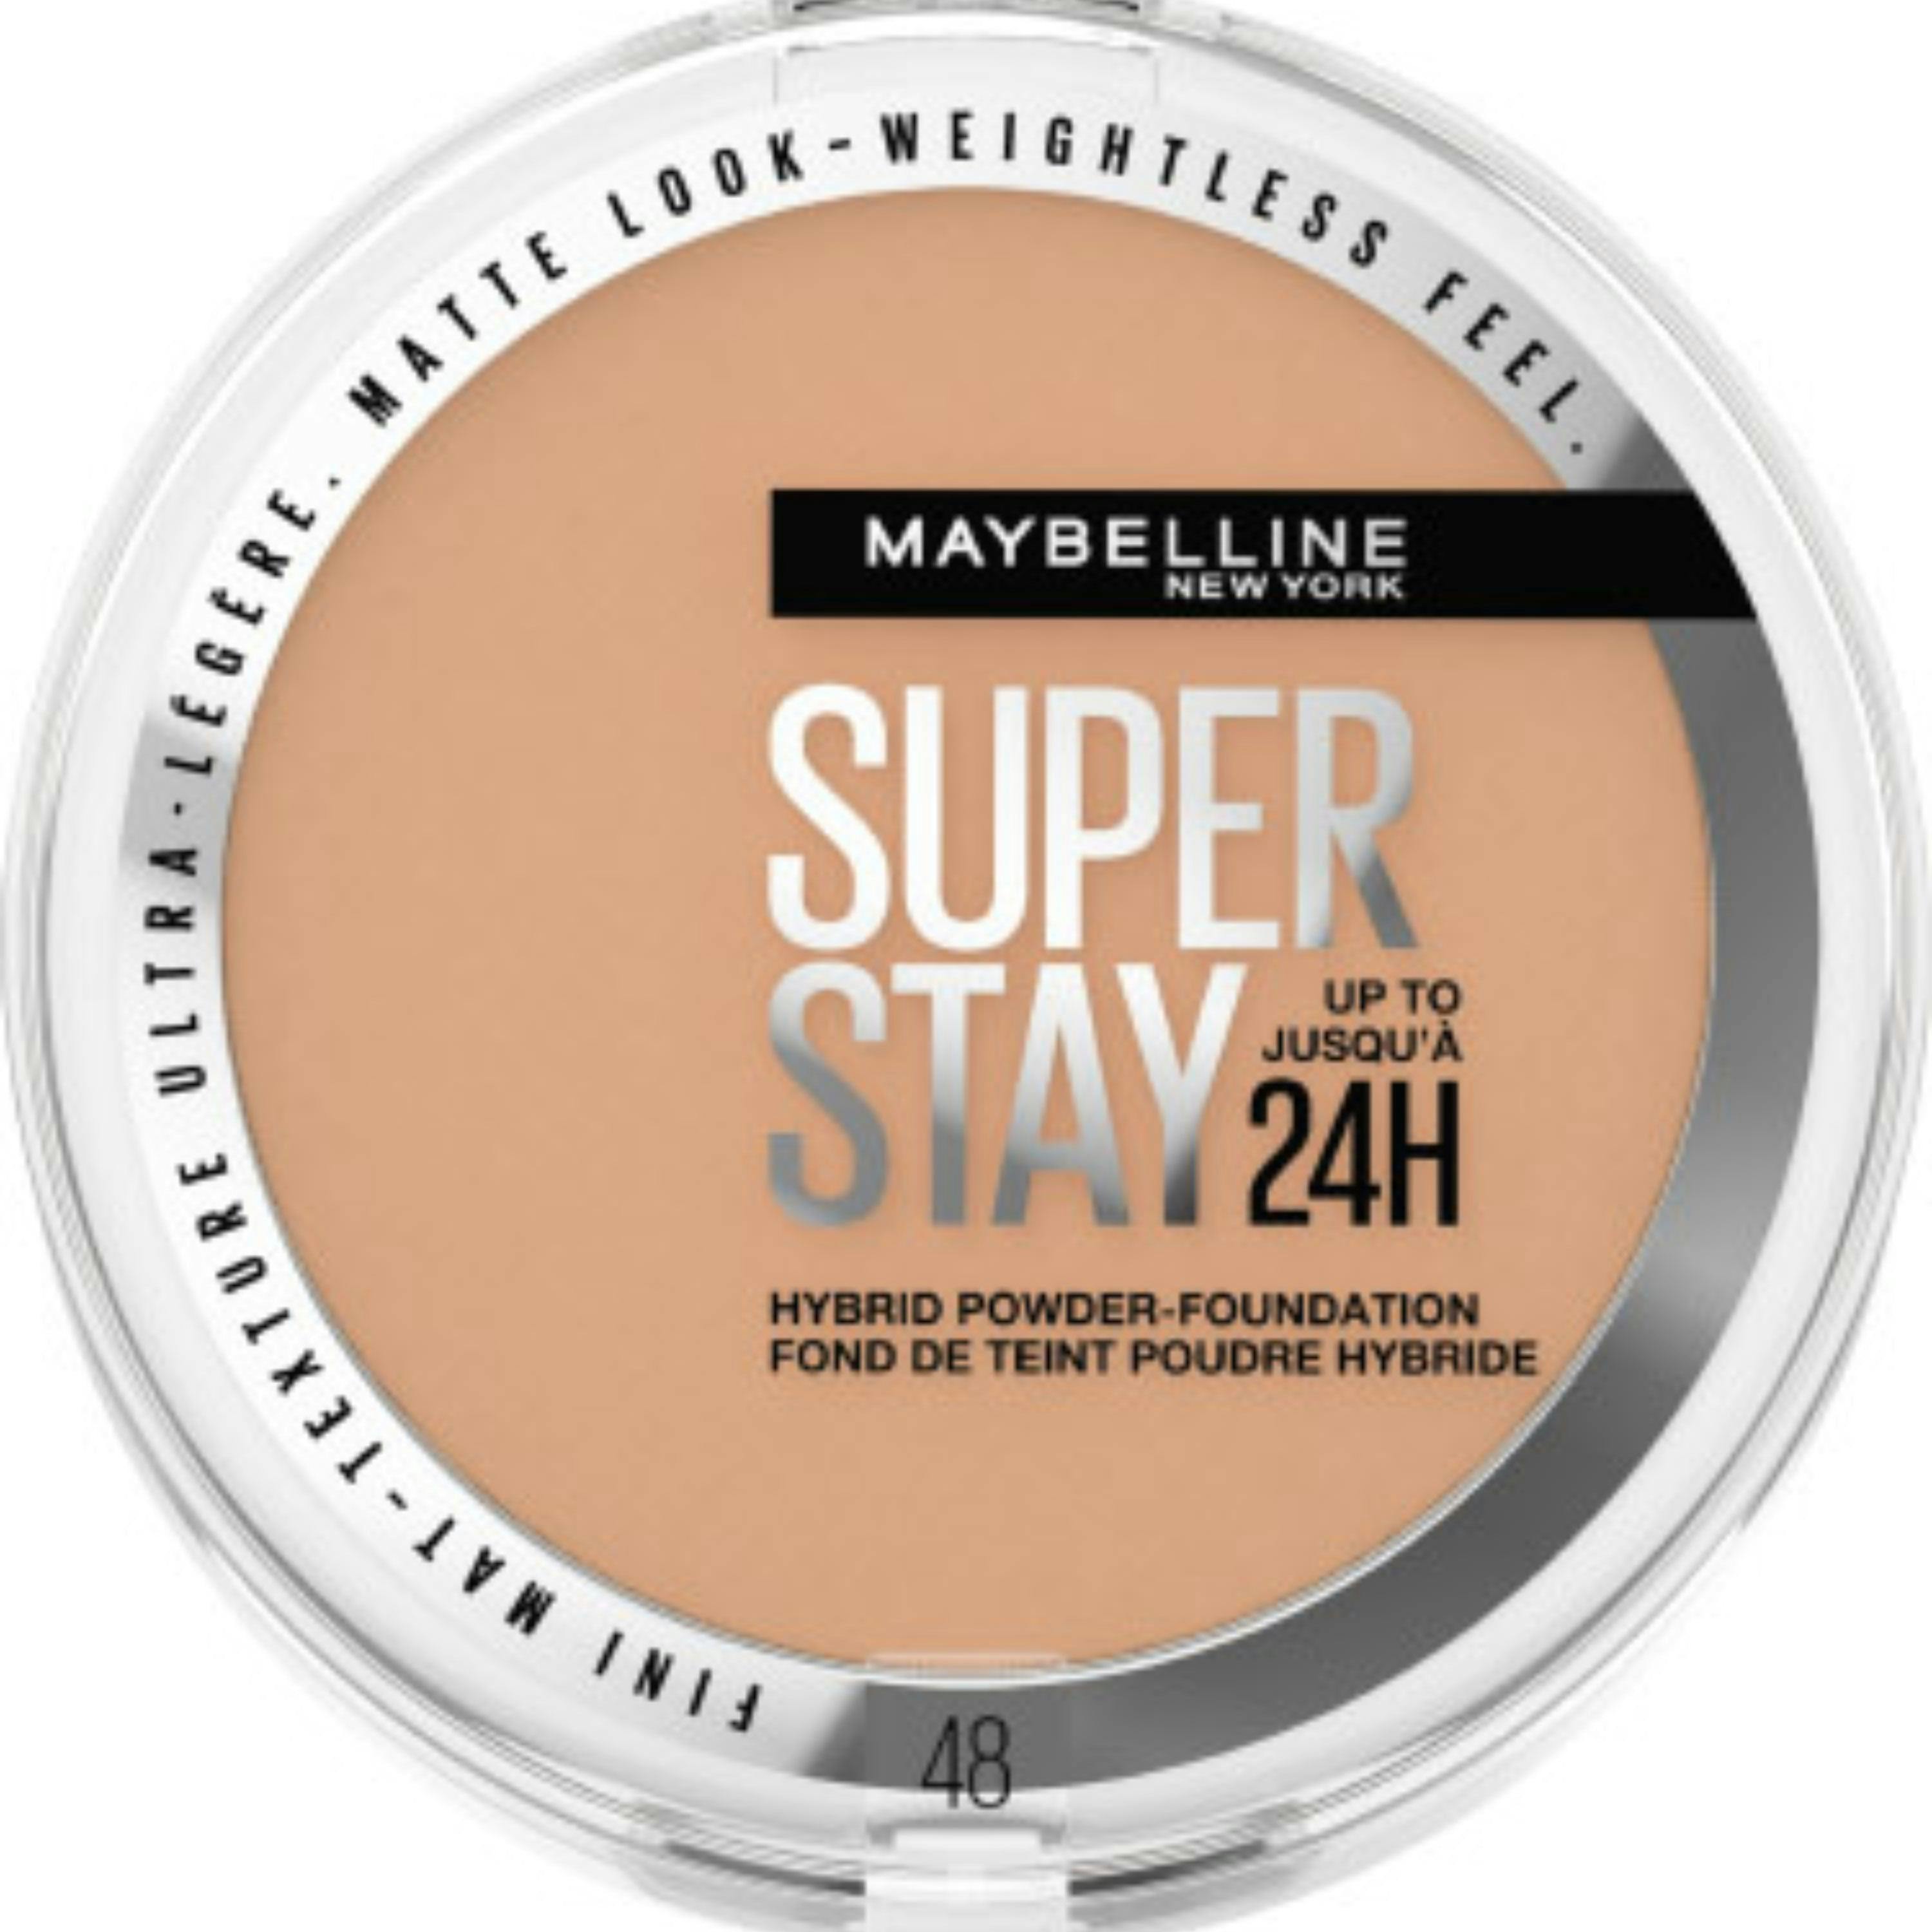 NEW* VIRAL SKIN TINT!! MAYBELLINE 24 HR. SKIN TINT TESTED on COMBO